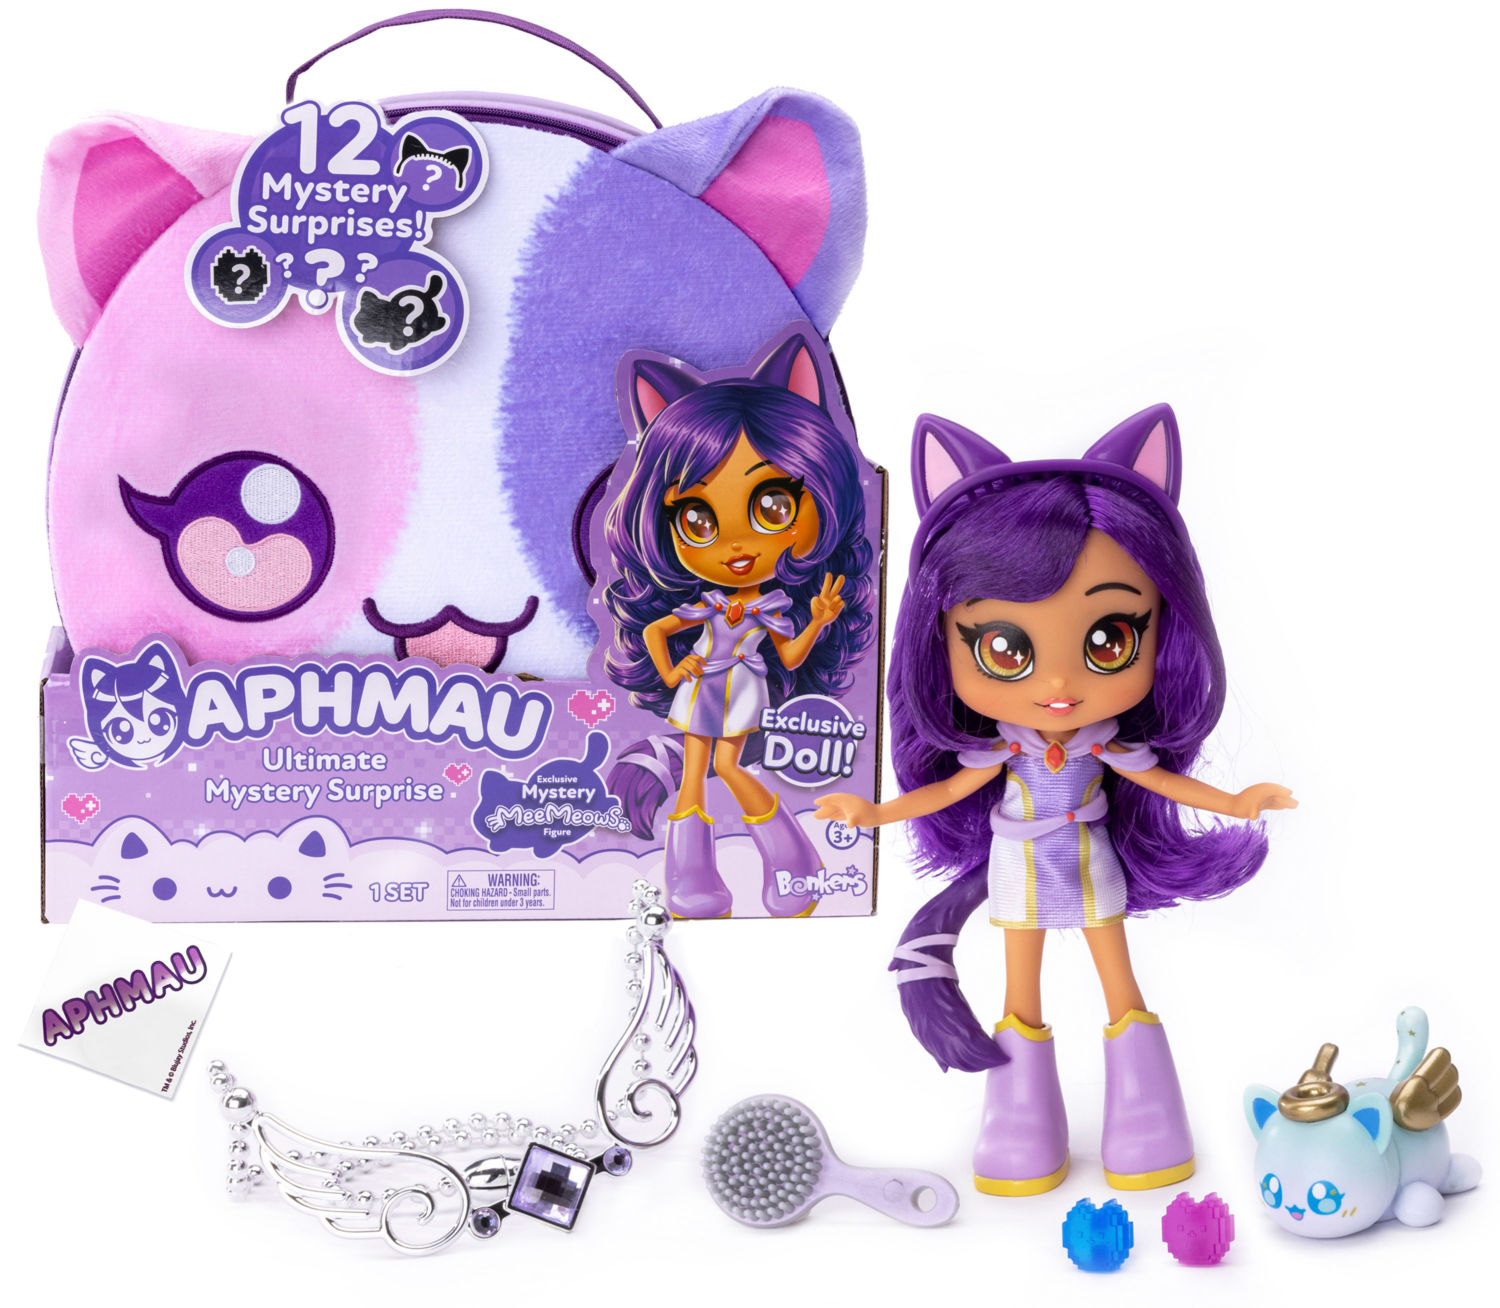 More Aphmau Toys Are Launching Soon and They're Paws-itively the